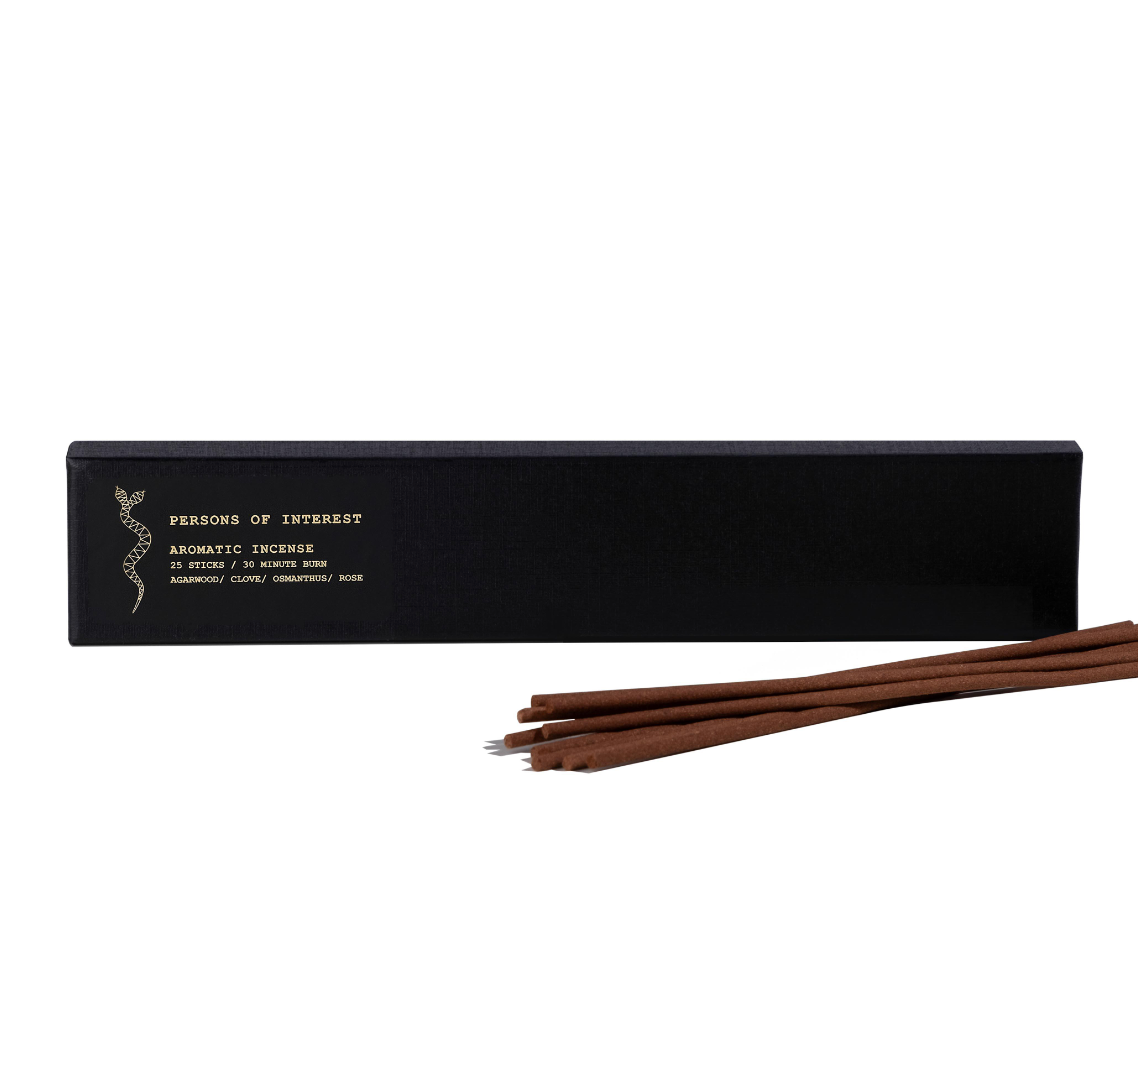 Incense Sticks from Persons of Interest